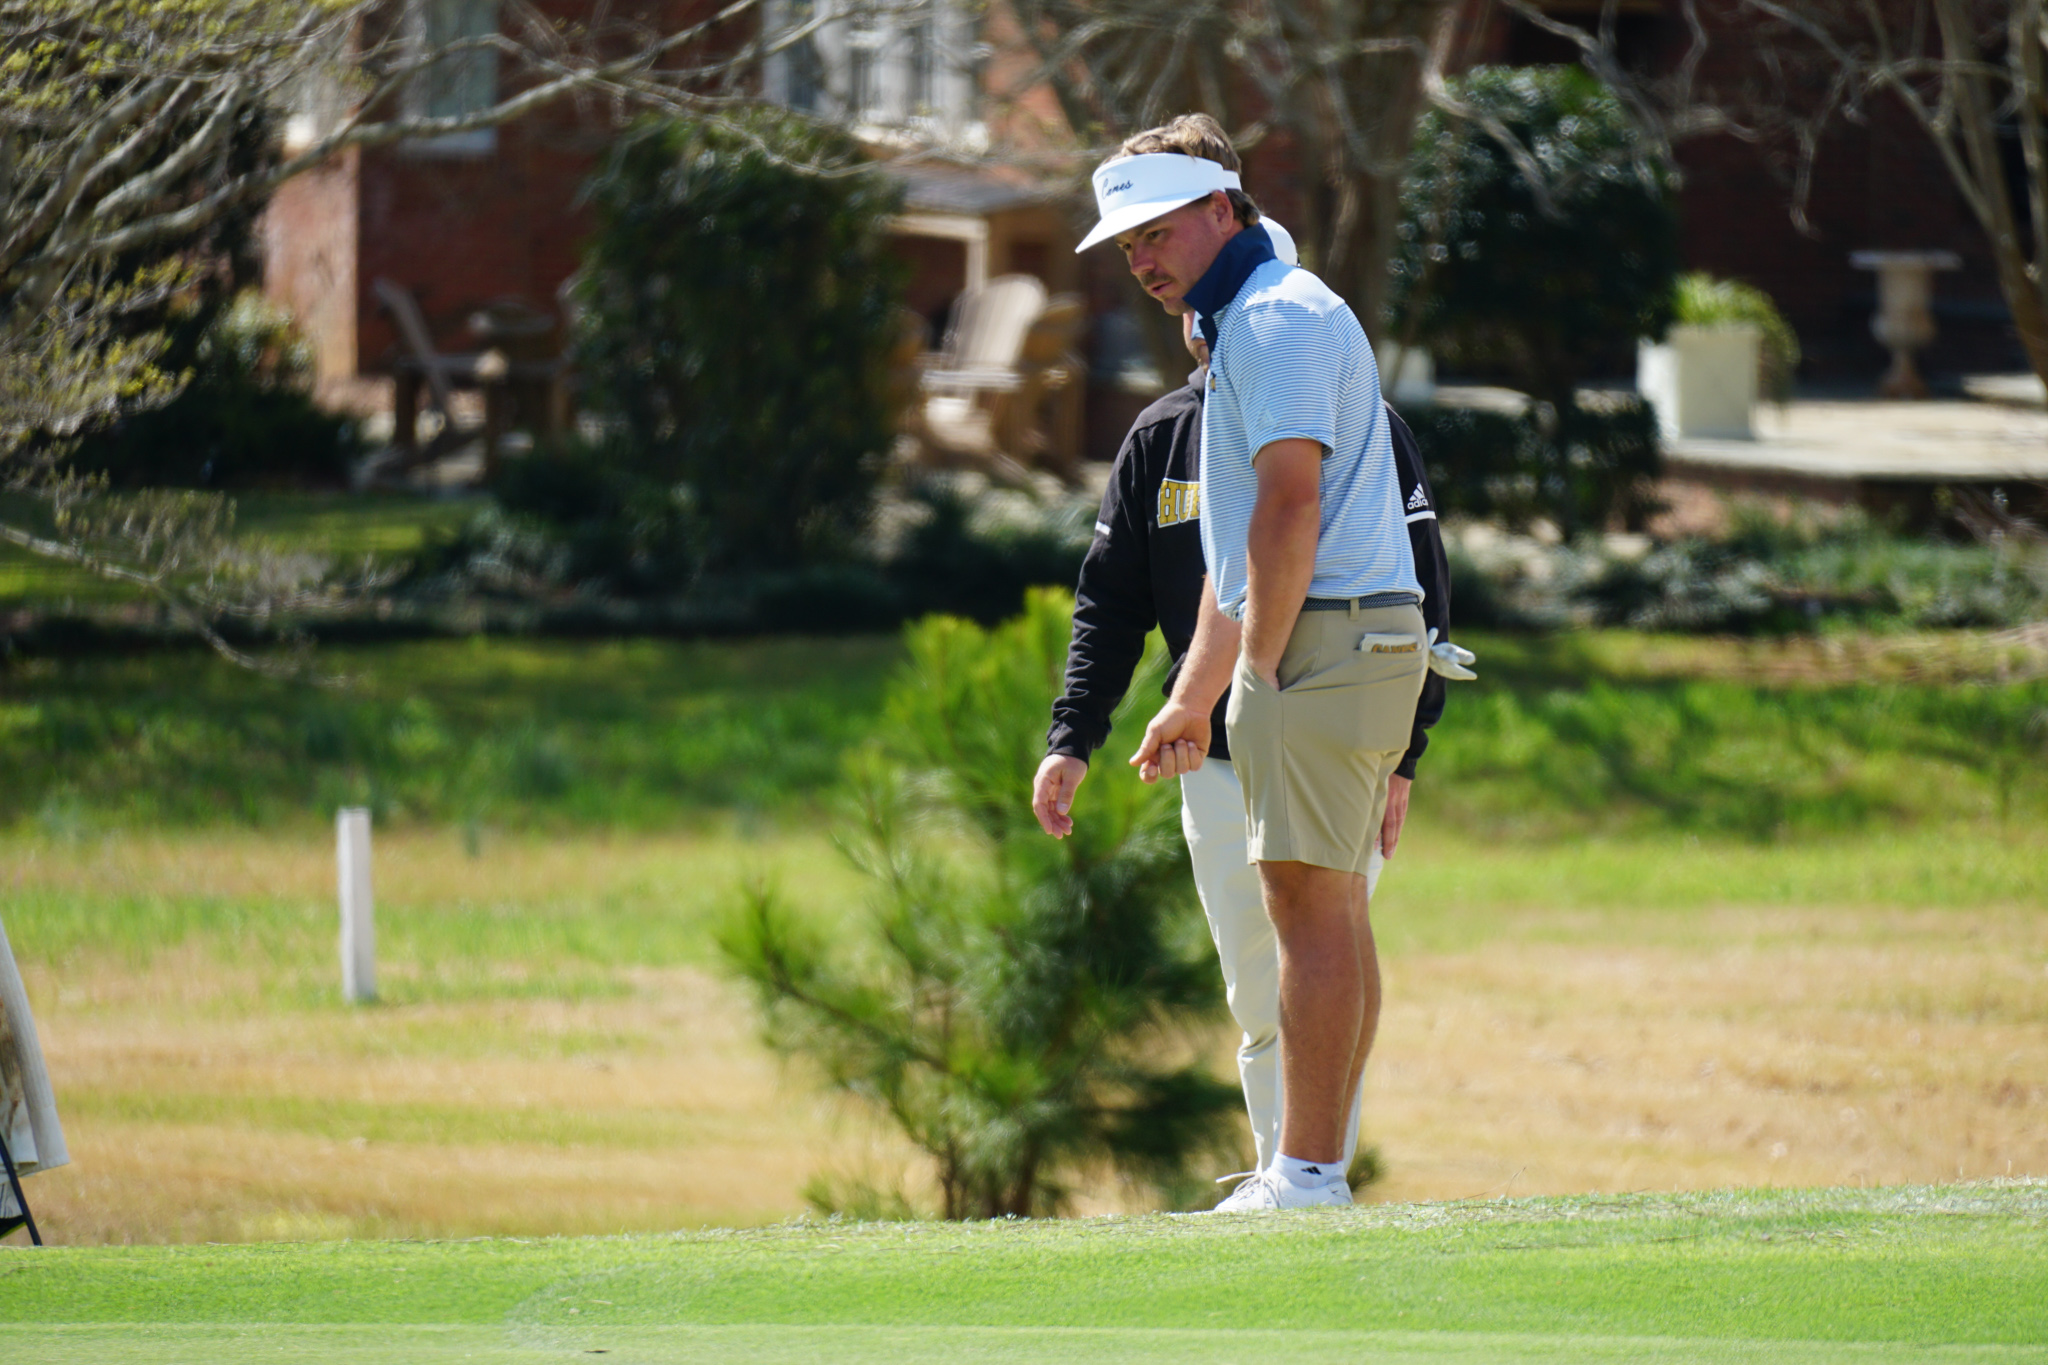 Hurricanes Place Sixth in Bobcat Invitational